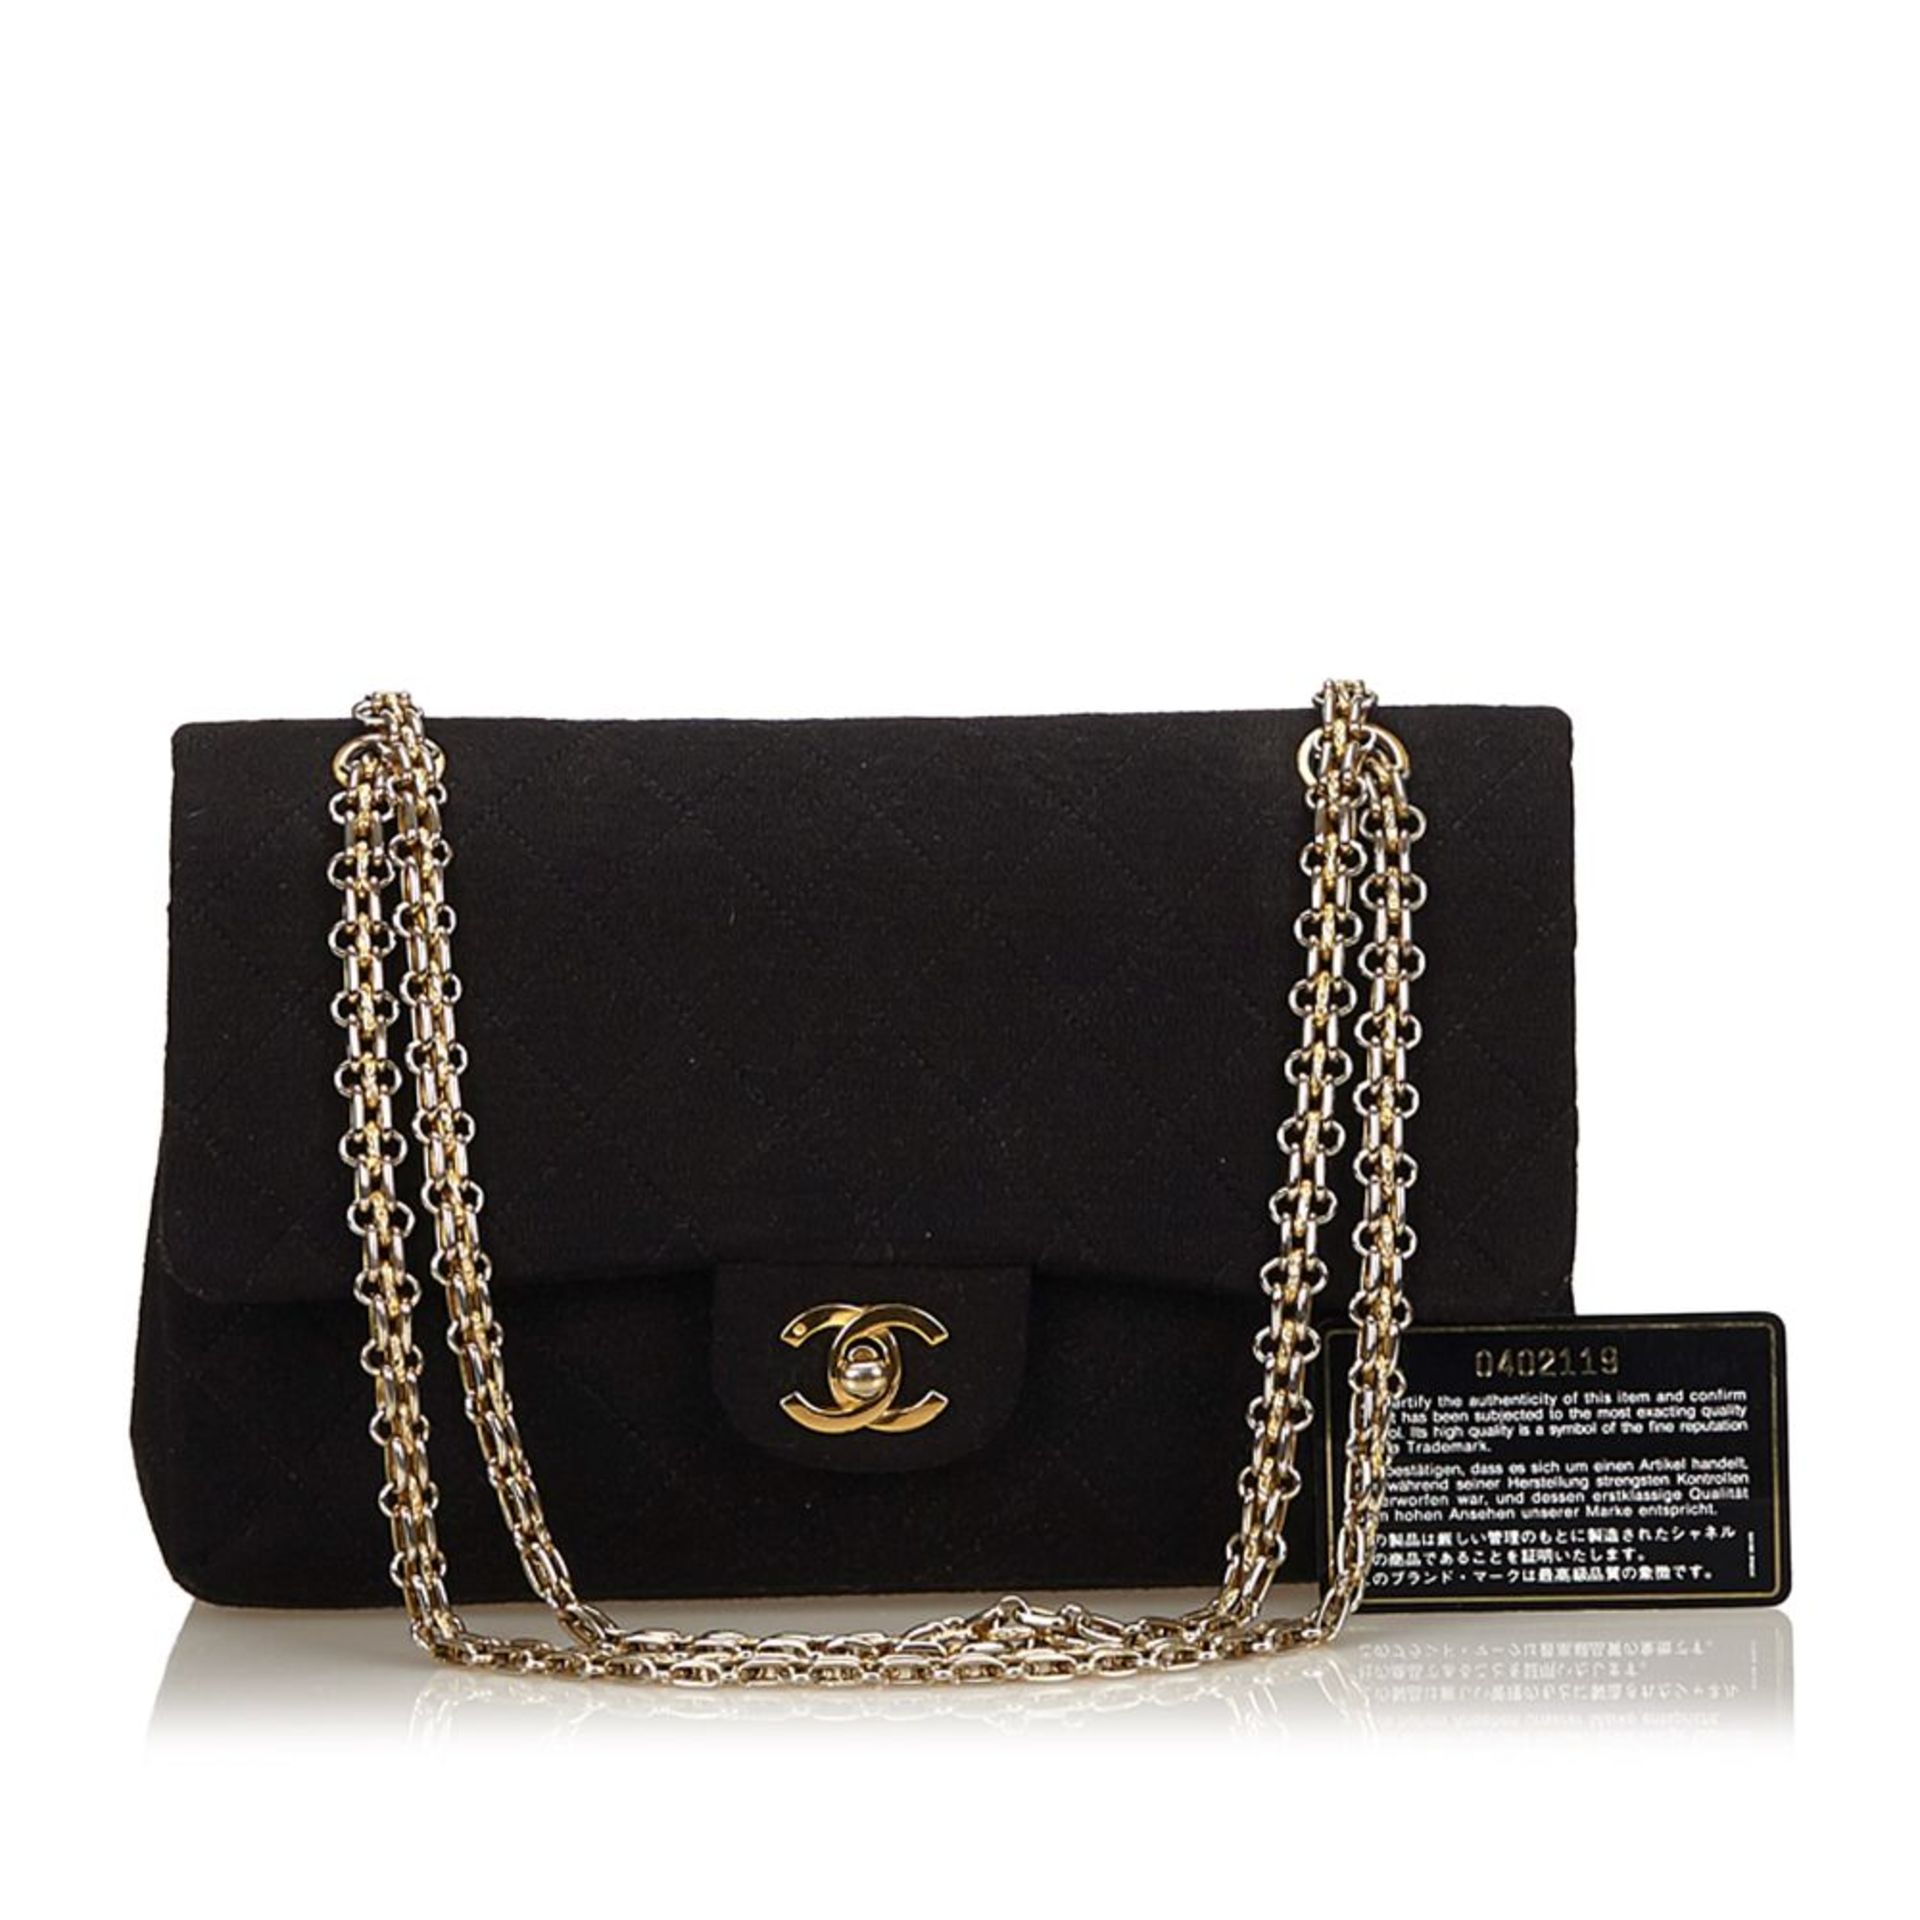 A Chanel classic medium cotton double flap shoulder bag,featuring a quilted cotton body with chain - Bild 5 aus 5